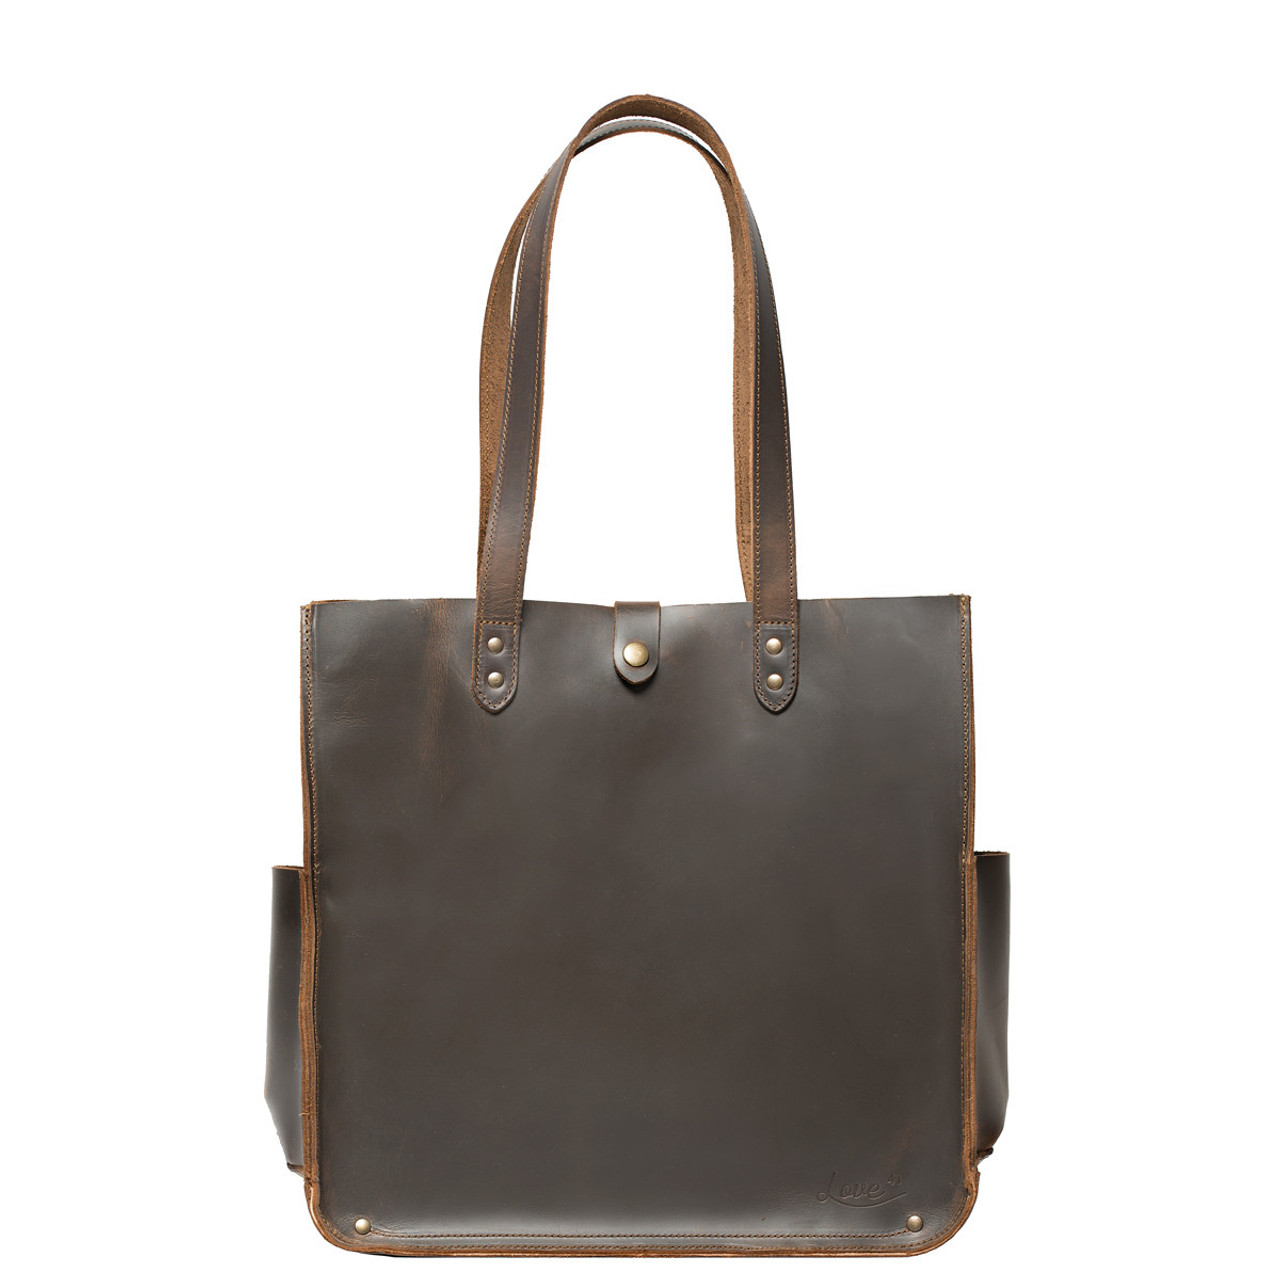 Woman's Leather Tote